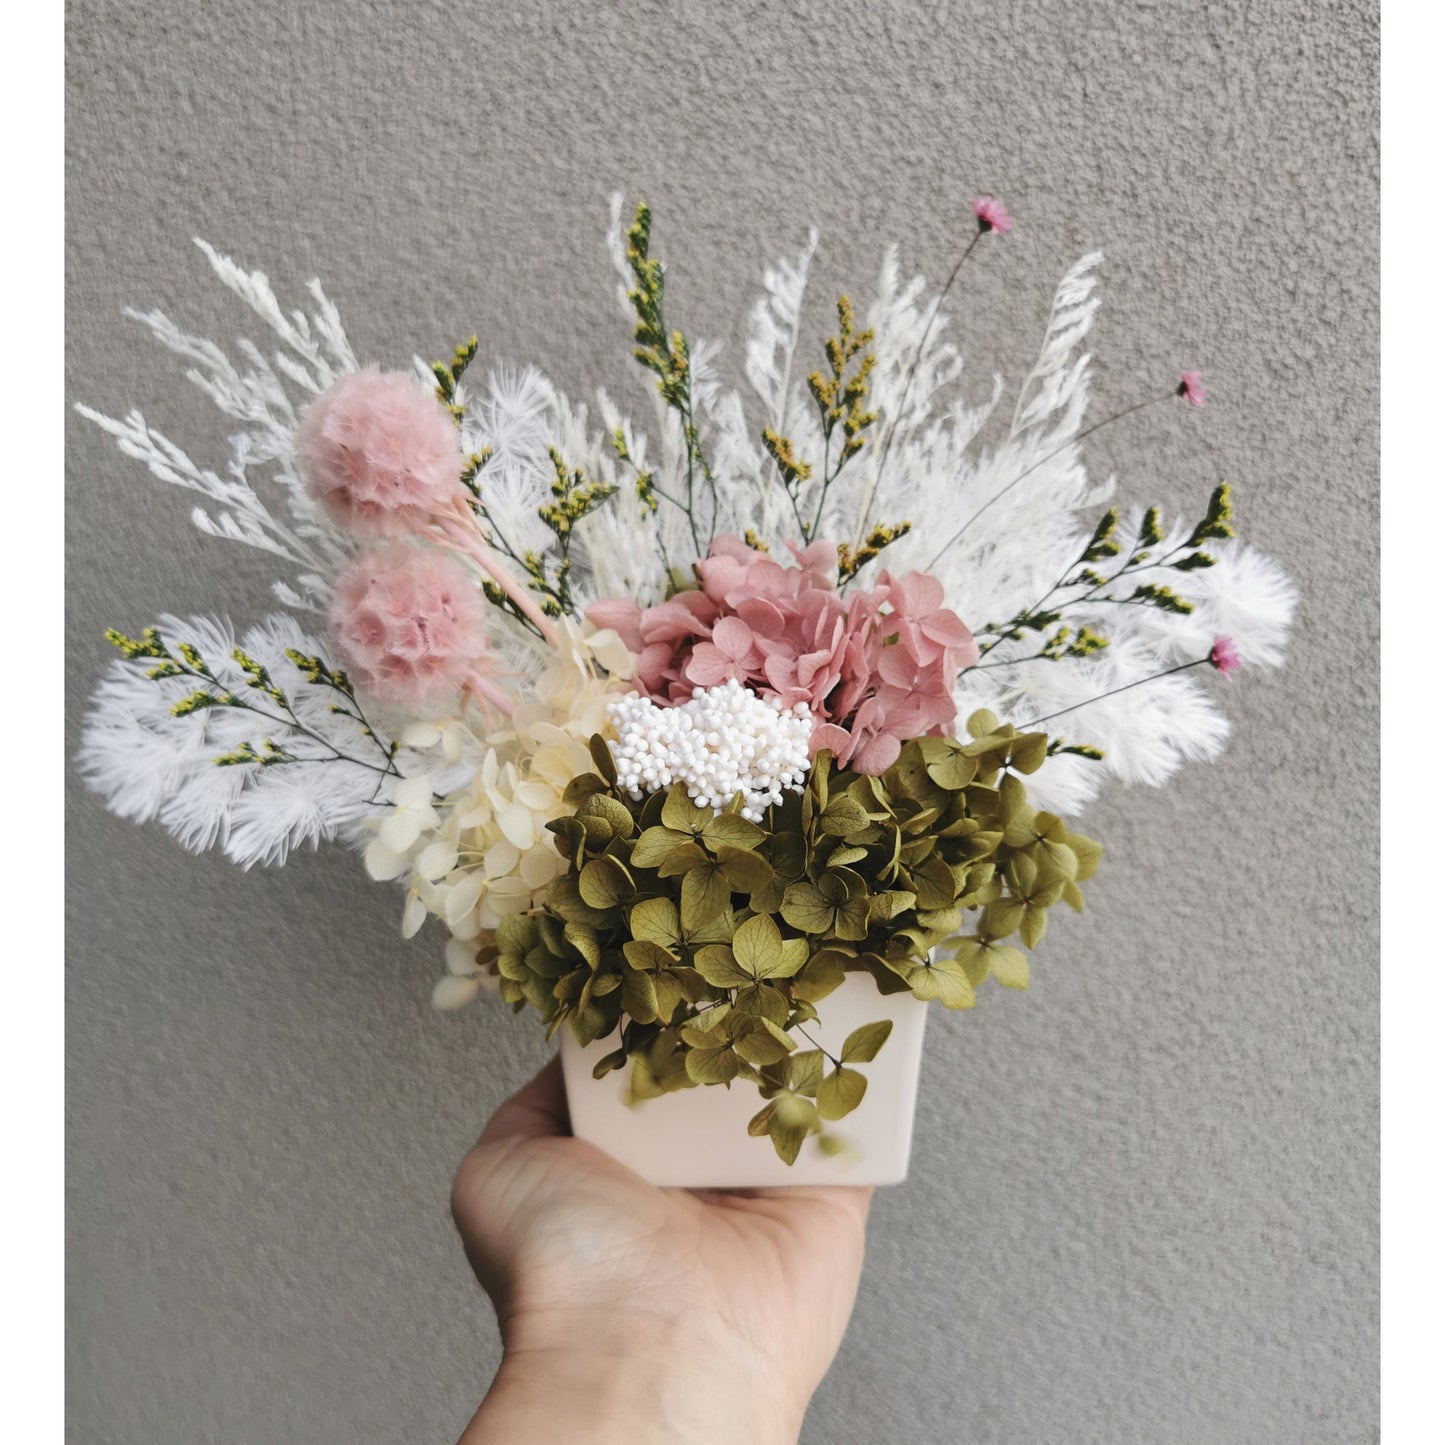 Pink, green and white dried and preserved flower arrangement in white square pot. Photo shows arrangement being held by hand against a blank wall